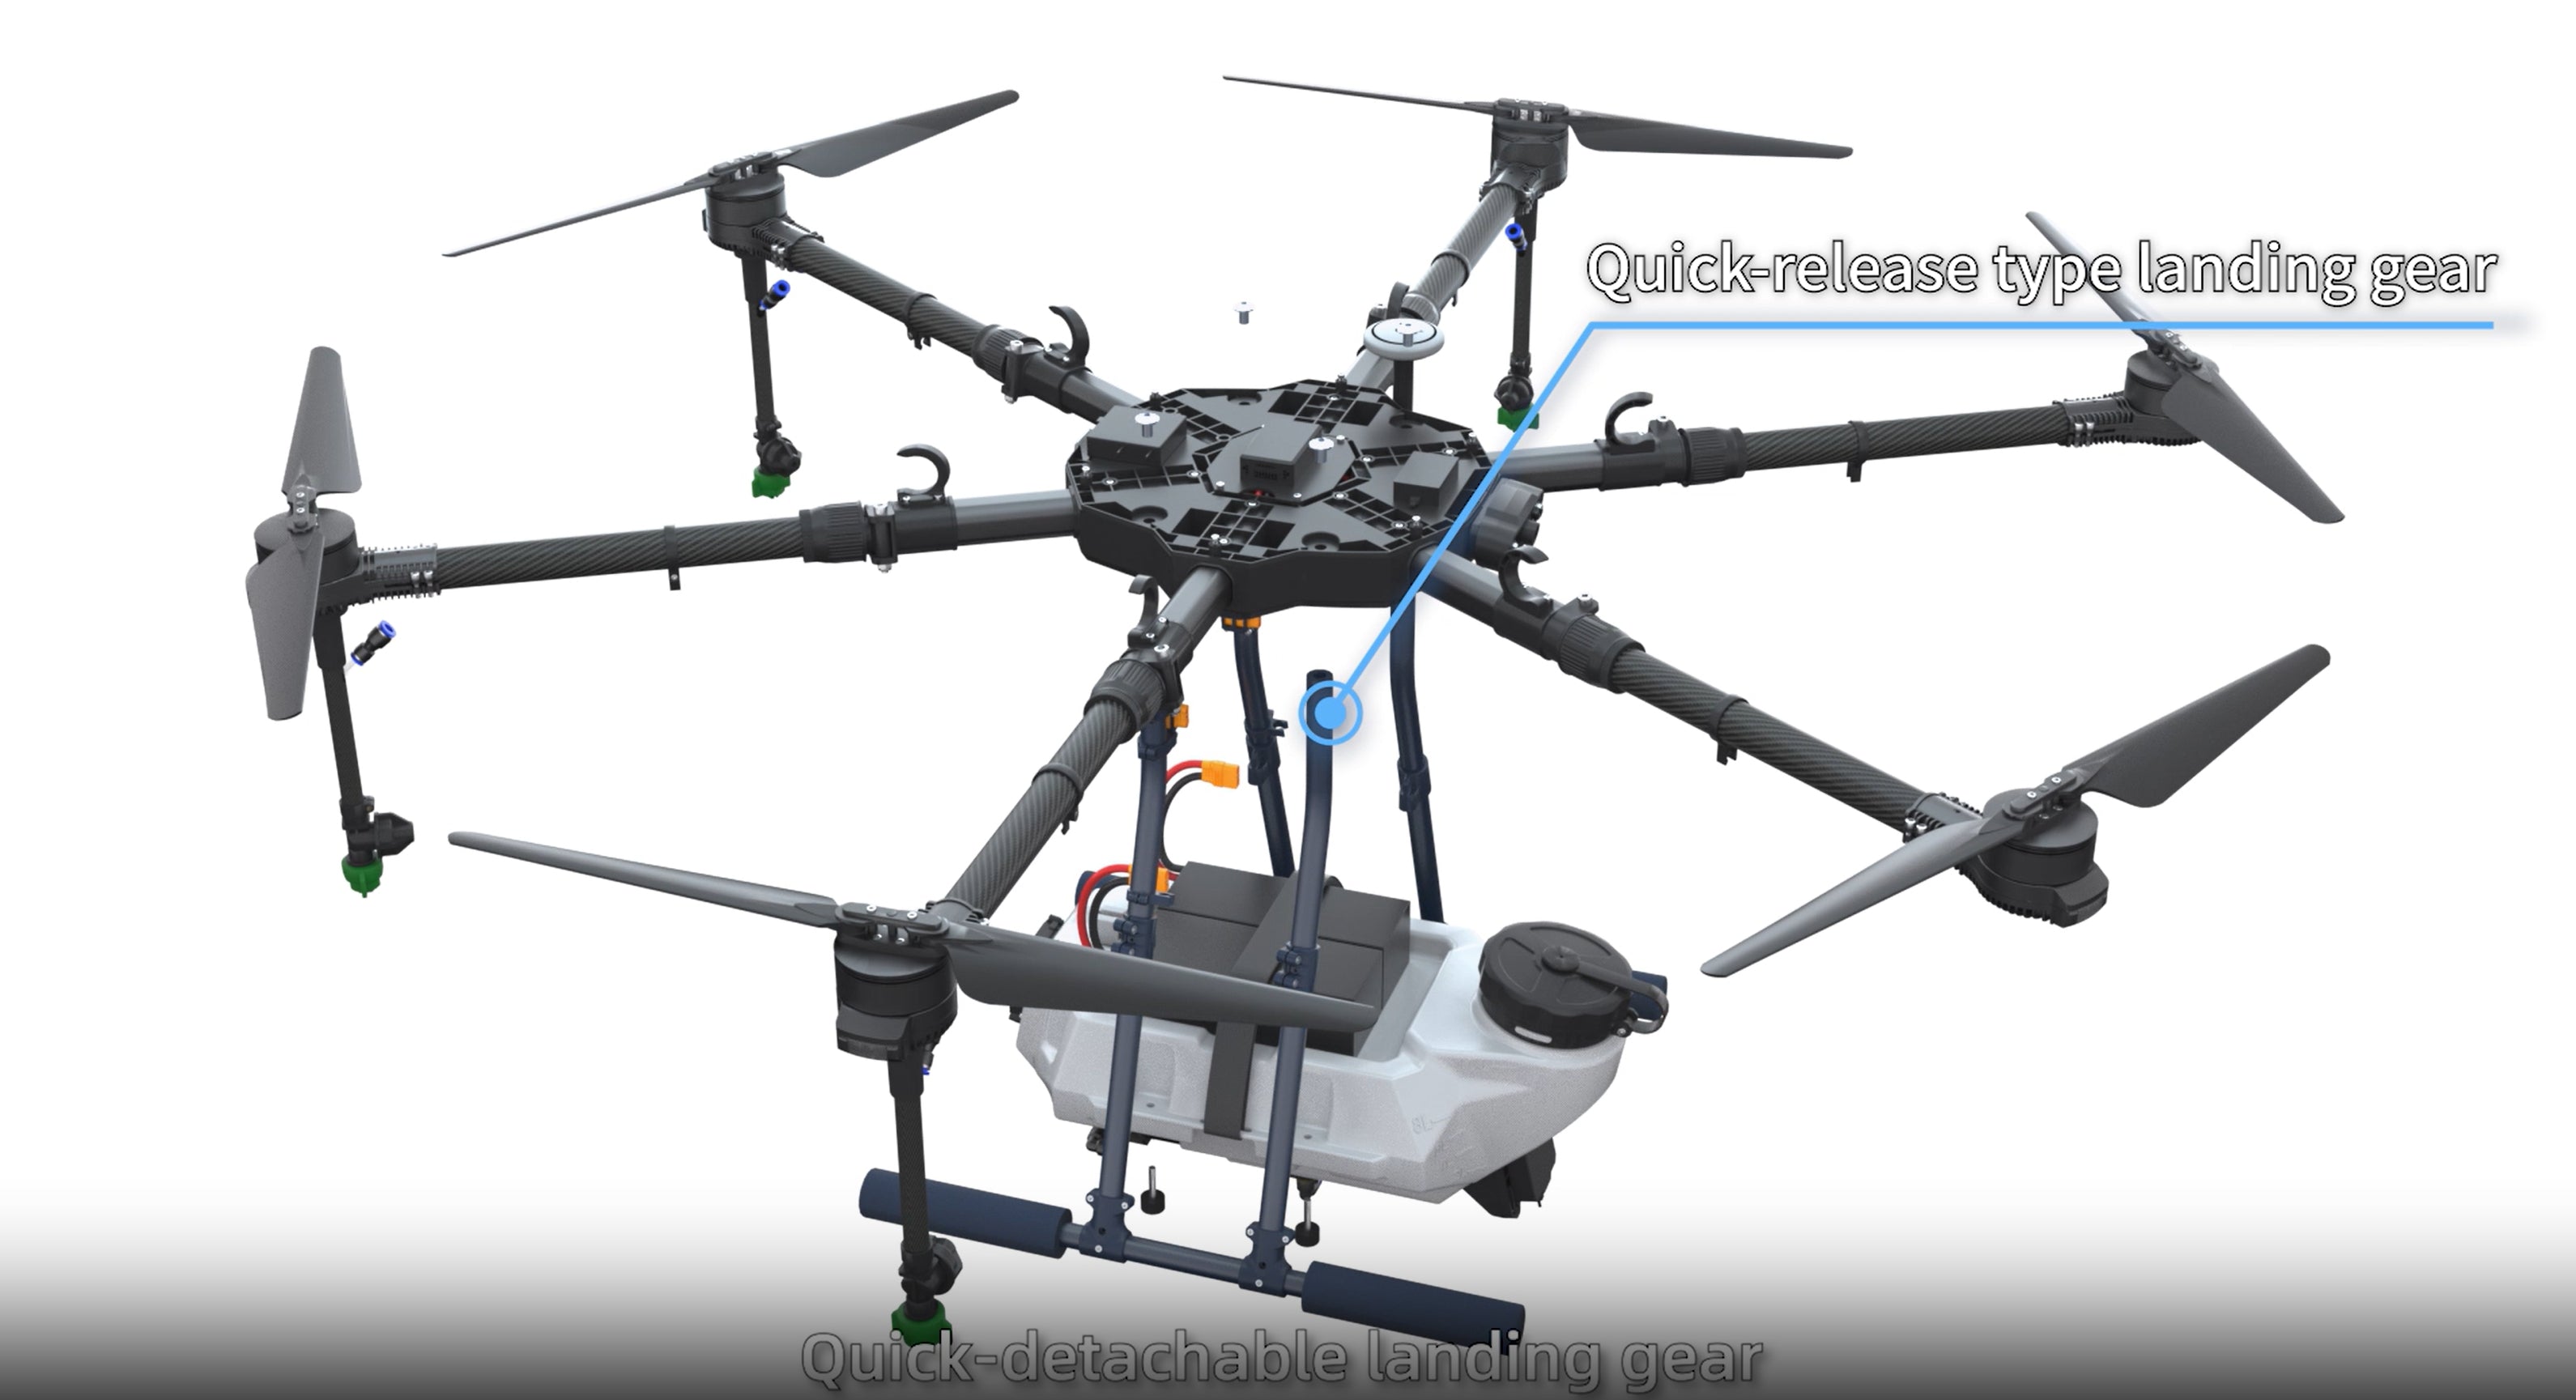 EFT E610M 10L Agriculture Drone, Featuring a quick-release type landing gear with quick detachment capabilities.